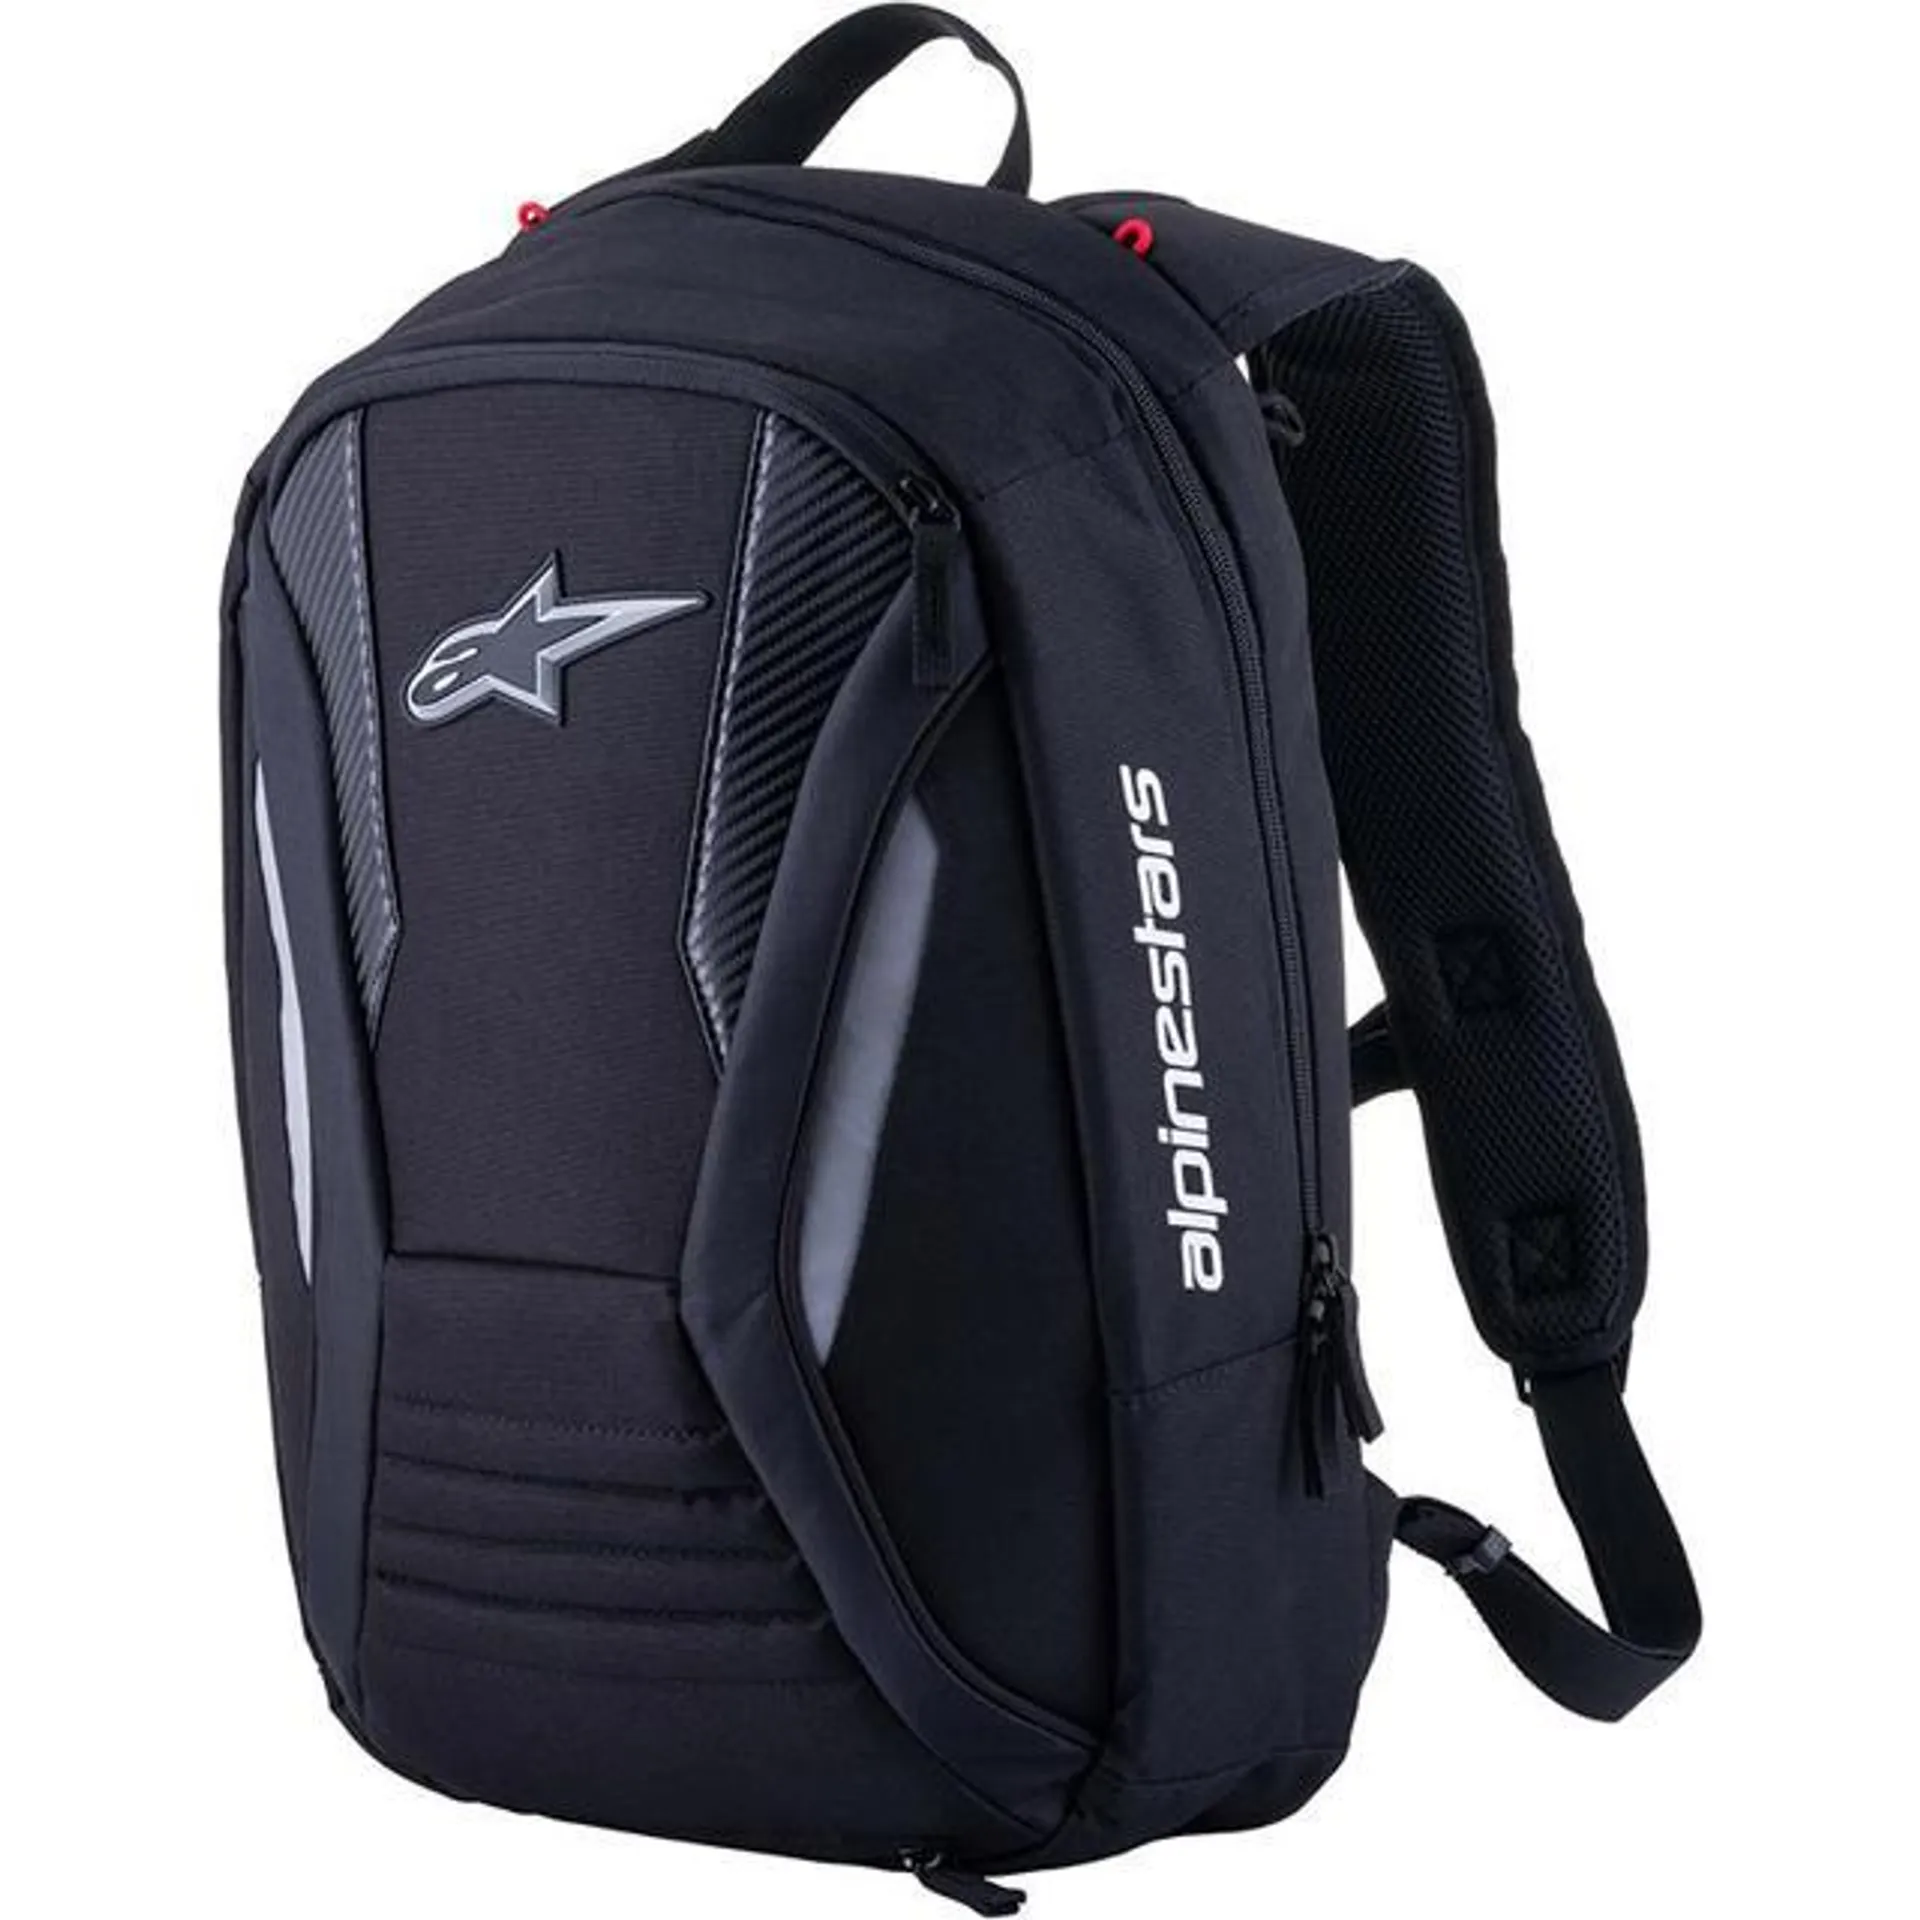 ALPINESTARS Sac à dos CHARGER BOOST BACKPACK